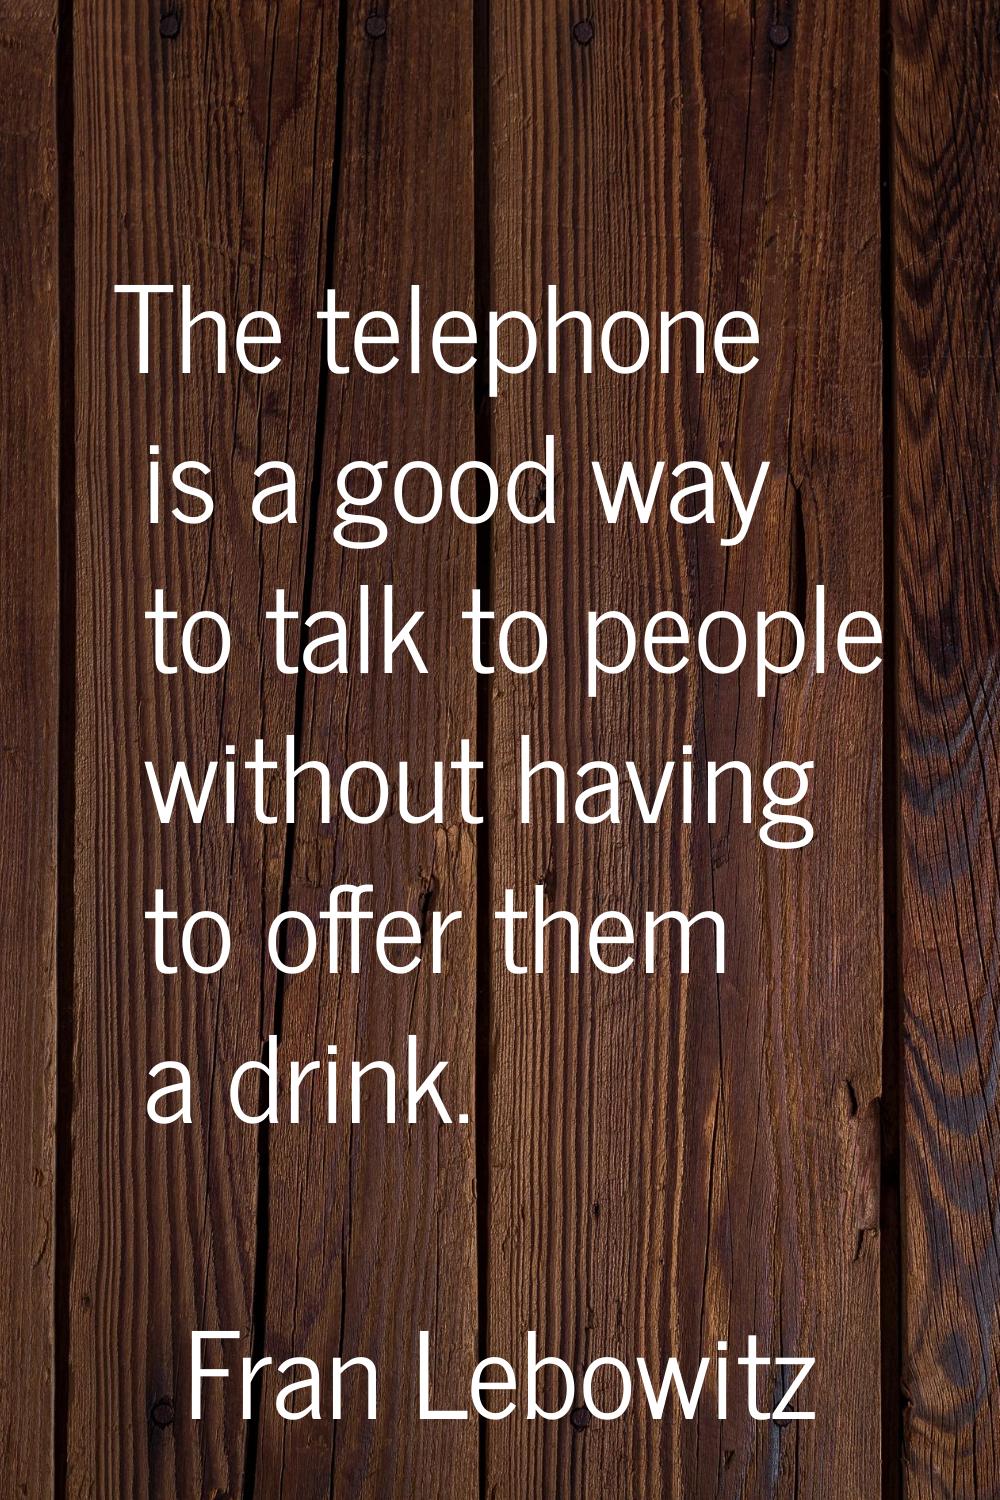 The telephone is a good way to talk to people without having to offer them a drink.